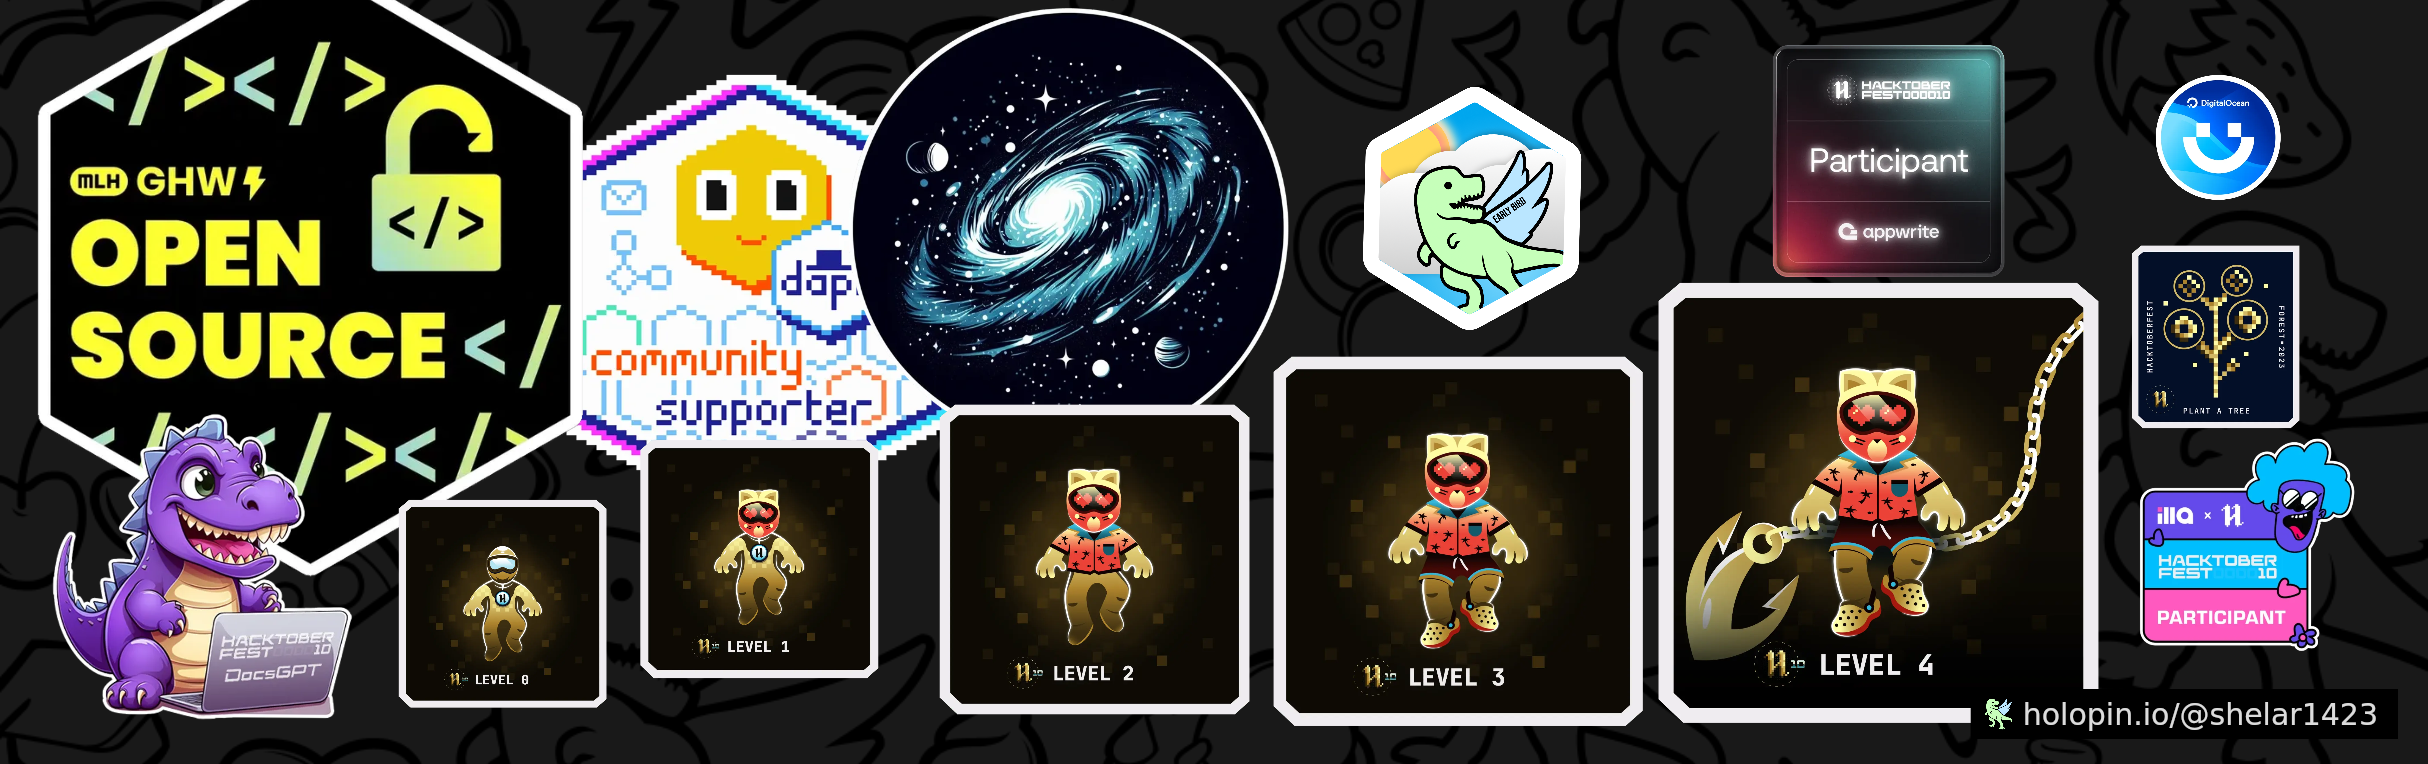 An image of @shelar1423's Holopin badges, which is a link to view their full Holopin profile